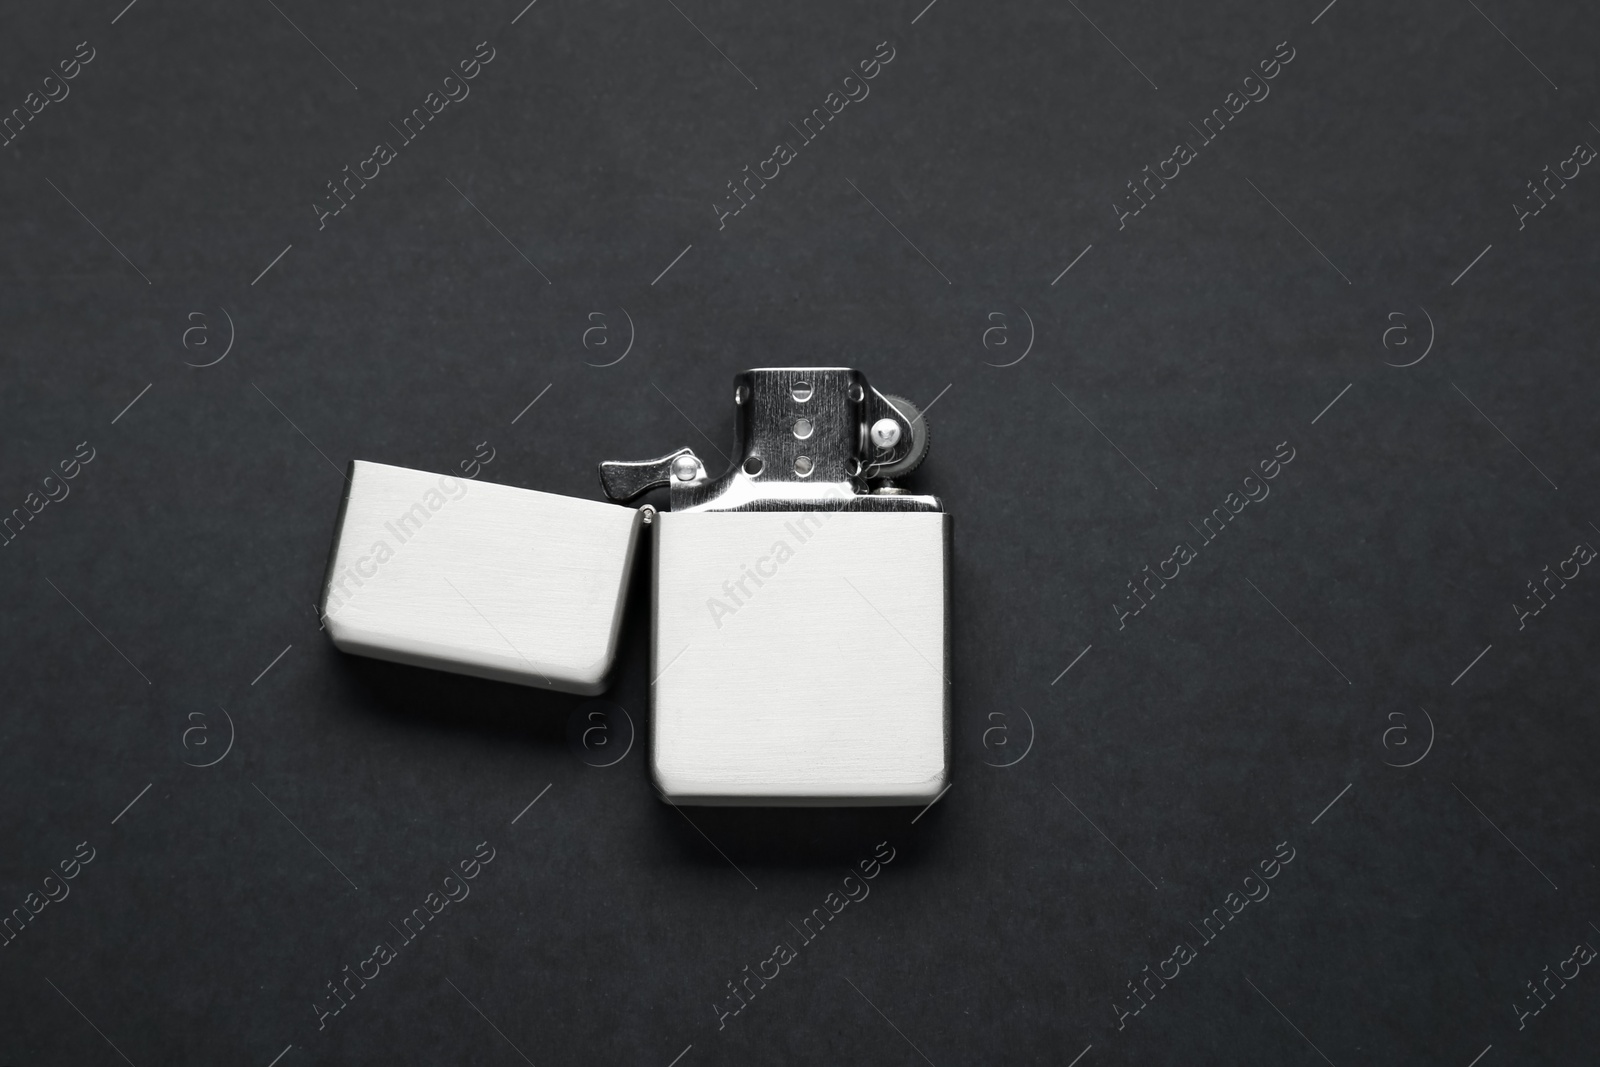 Photo of Gray metallic cigarette lighter on black background, top view